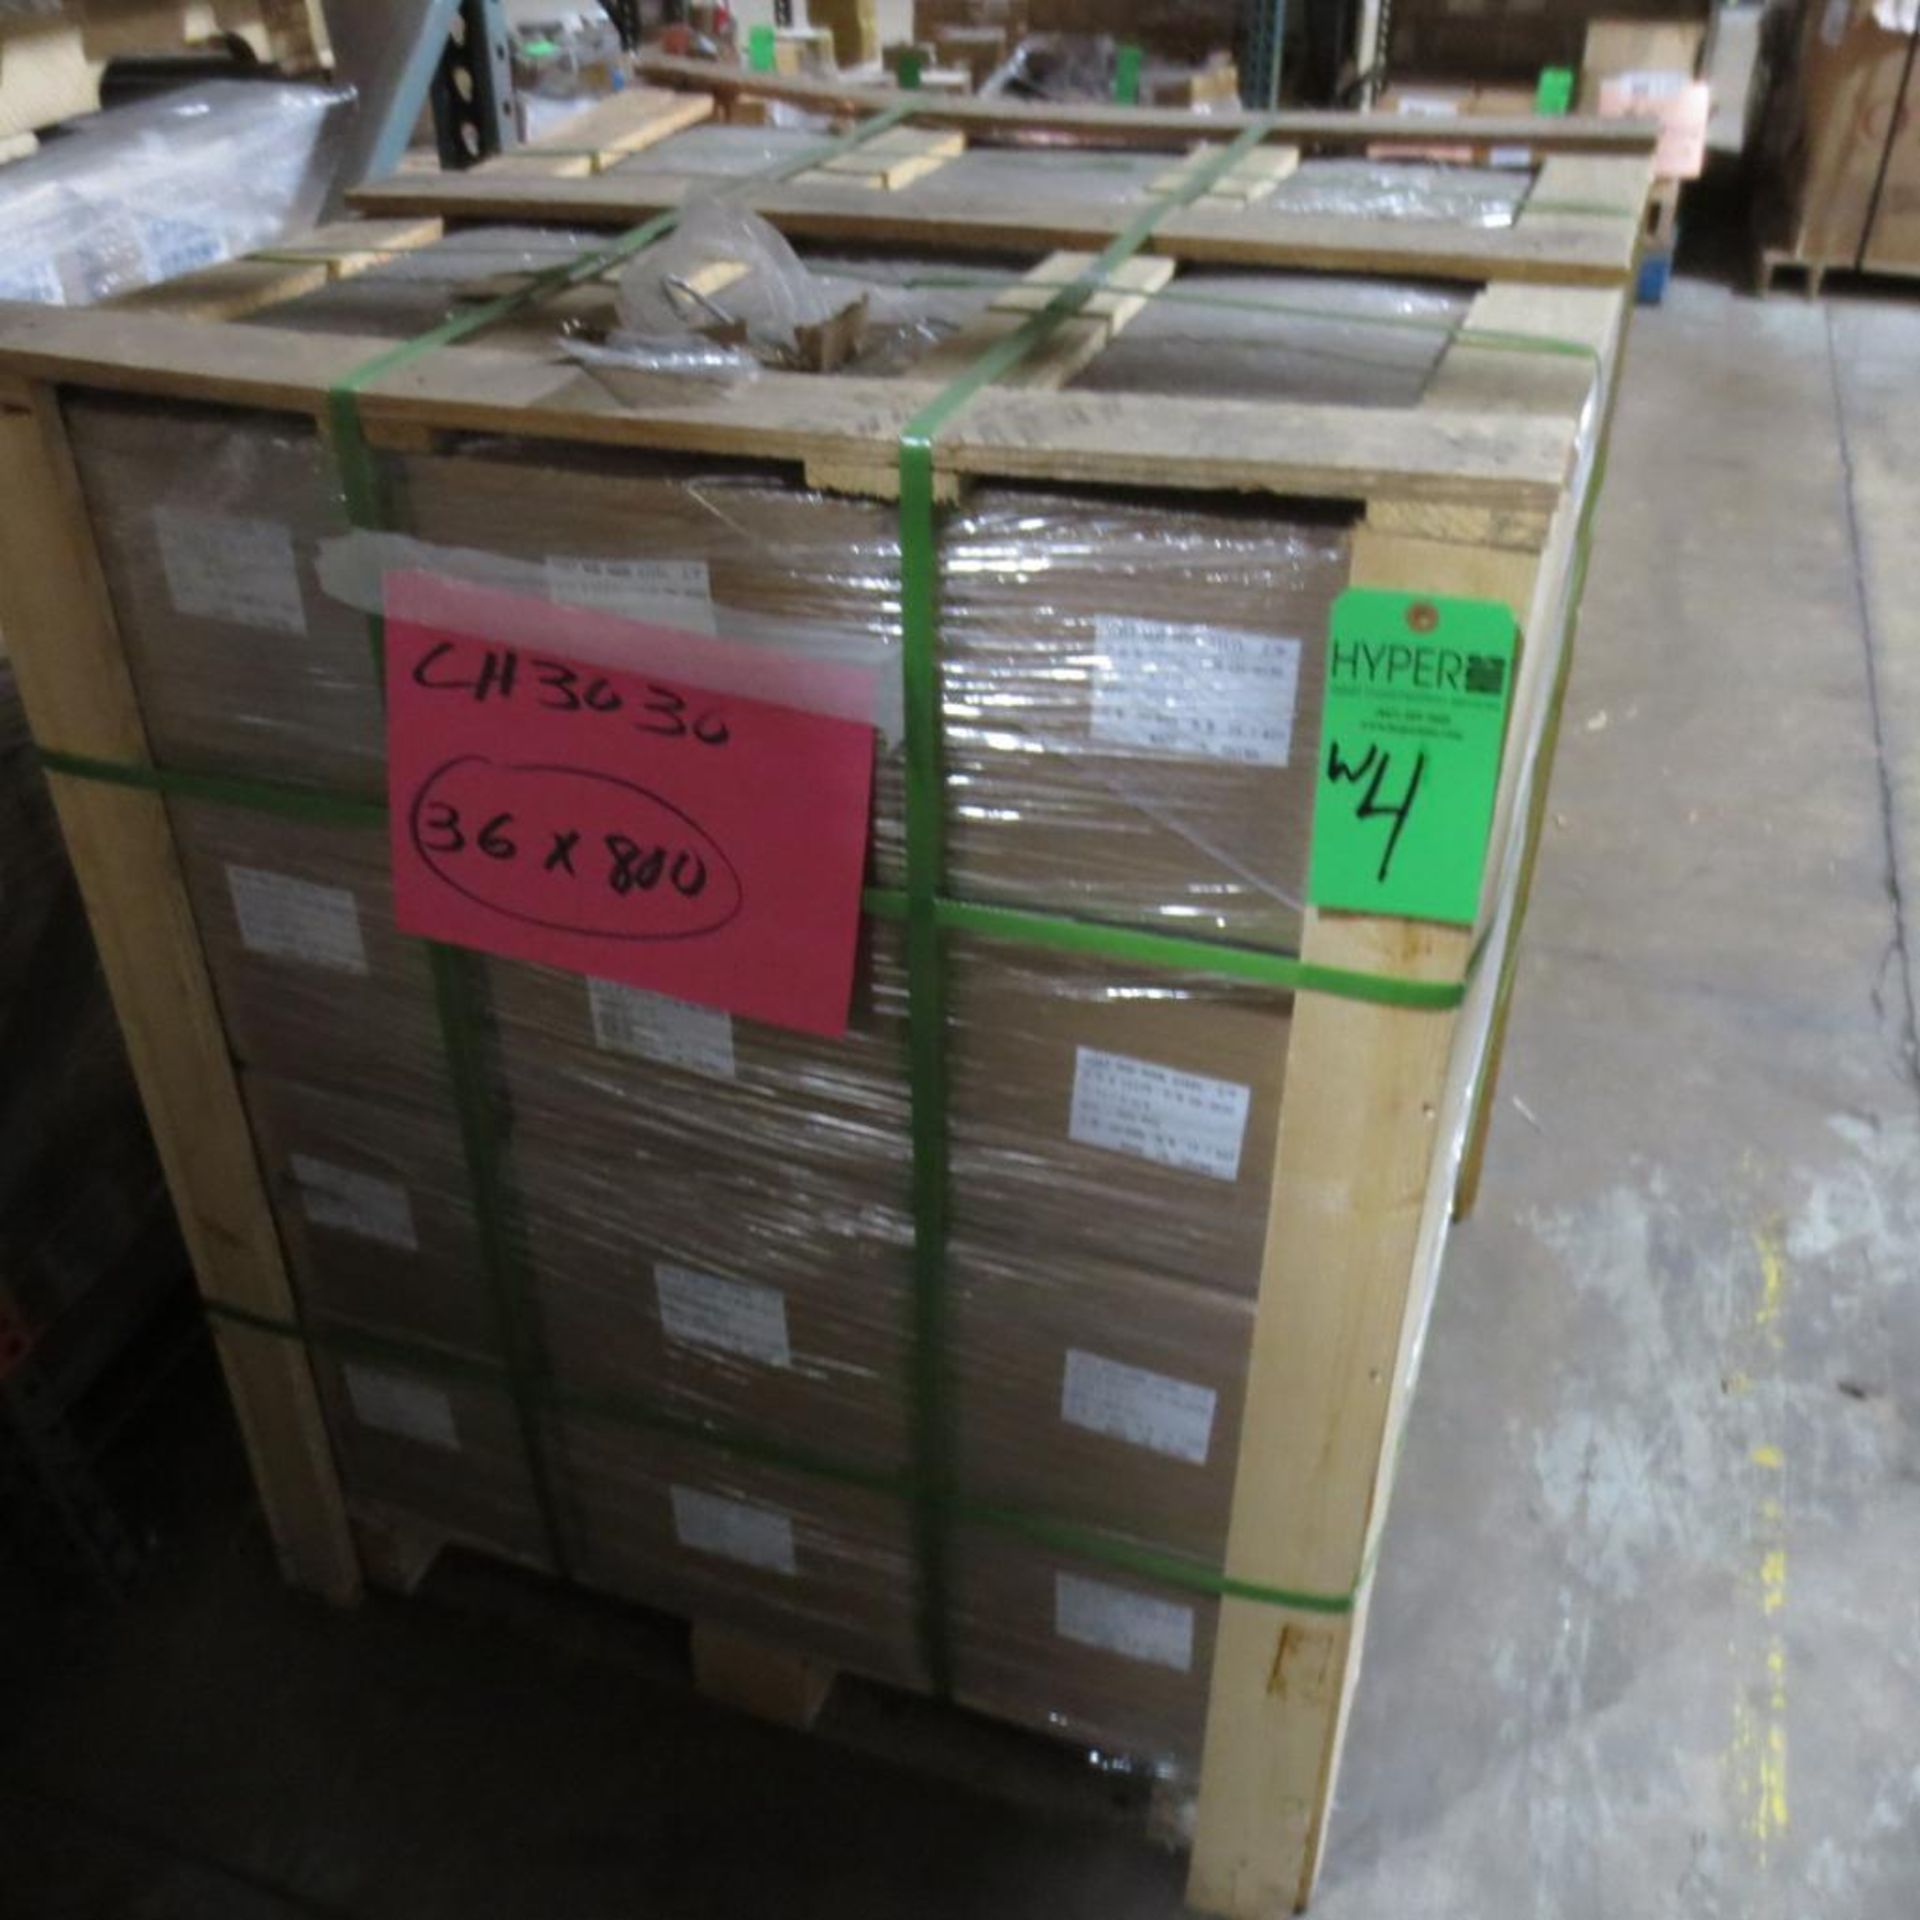 Appx. (36) Boxes on Pallet of Coat Rod Hooks Steel Z/P 800 to Box 3/16 x 4/3/4 PO22279P/N CH-3030, S - Image 3 of 5